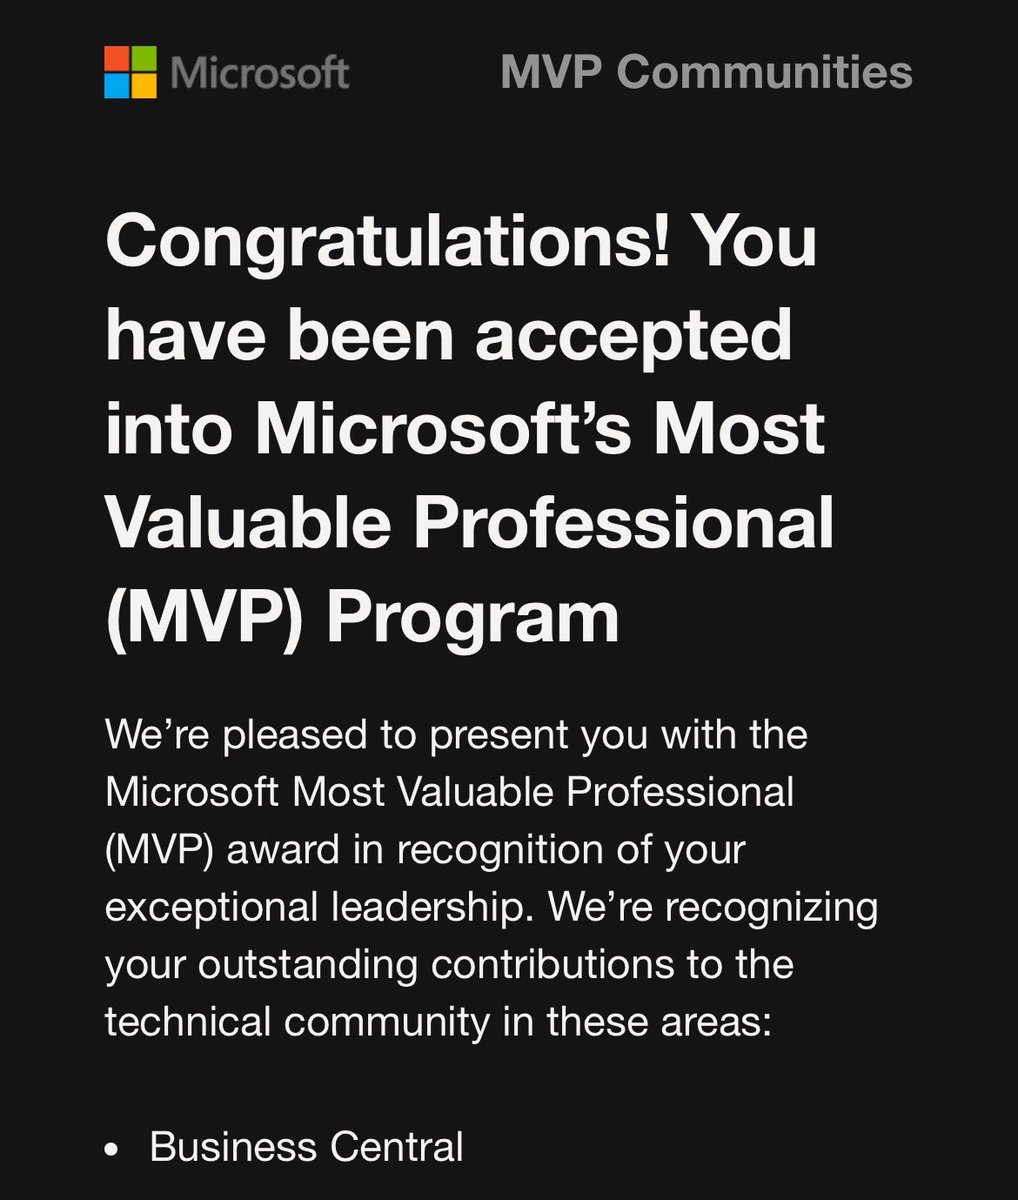 Today’s a non working day in Lithuania. i said I’ll work anyway, so I can take the Friday off.

Turns out I won’t. I’m too excited!
Just got the biggest email of my career! :D

#MVP #BusinessCentral #mvpbuzz